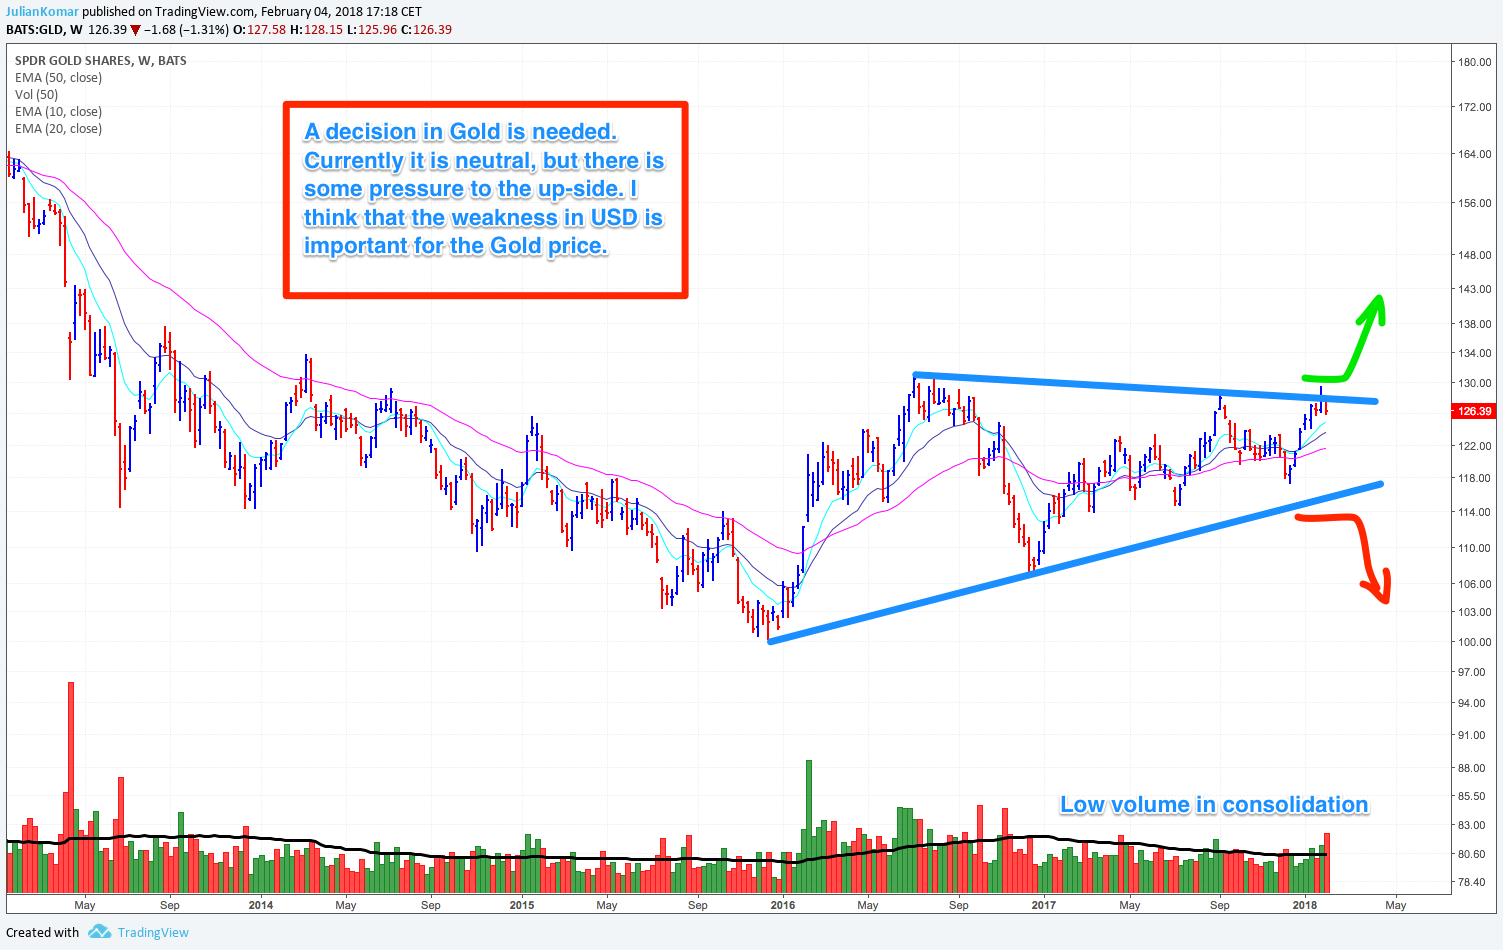 Gold with the GLD ETF in the weekly chart